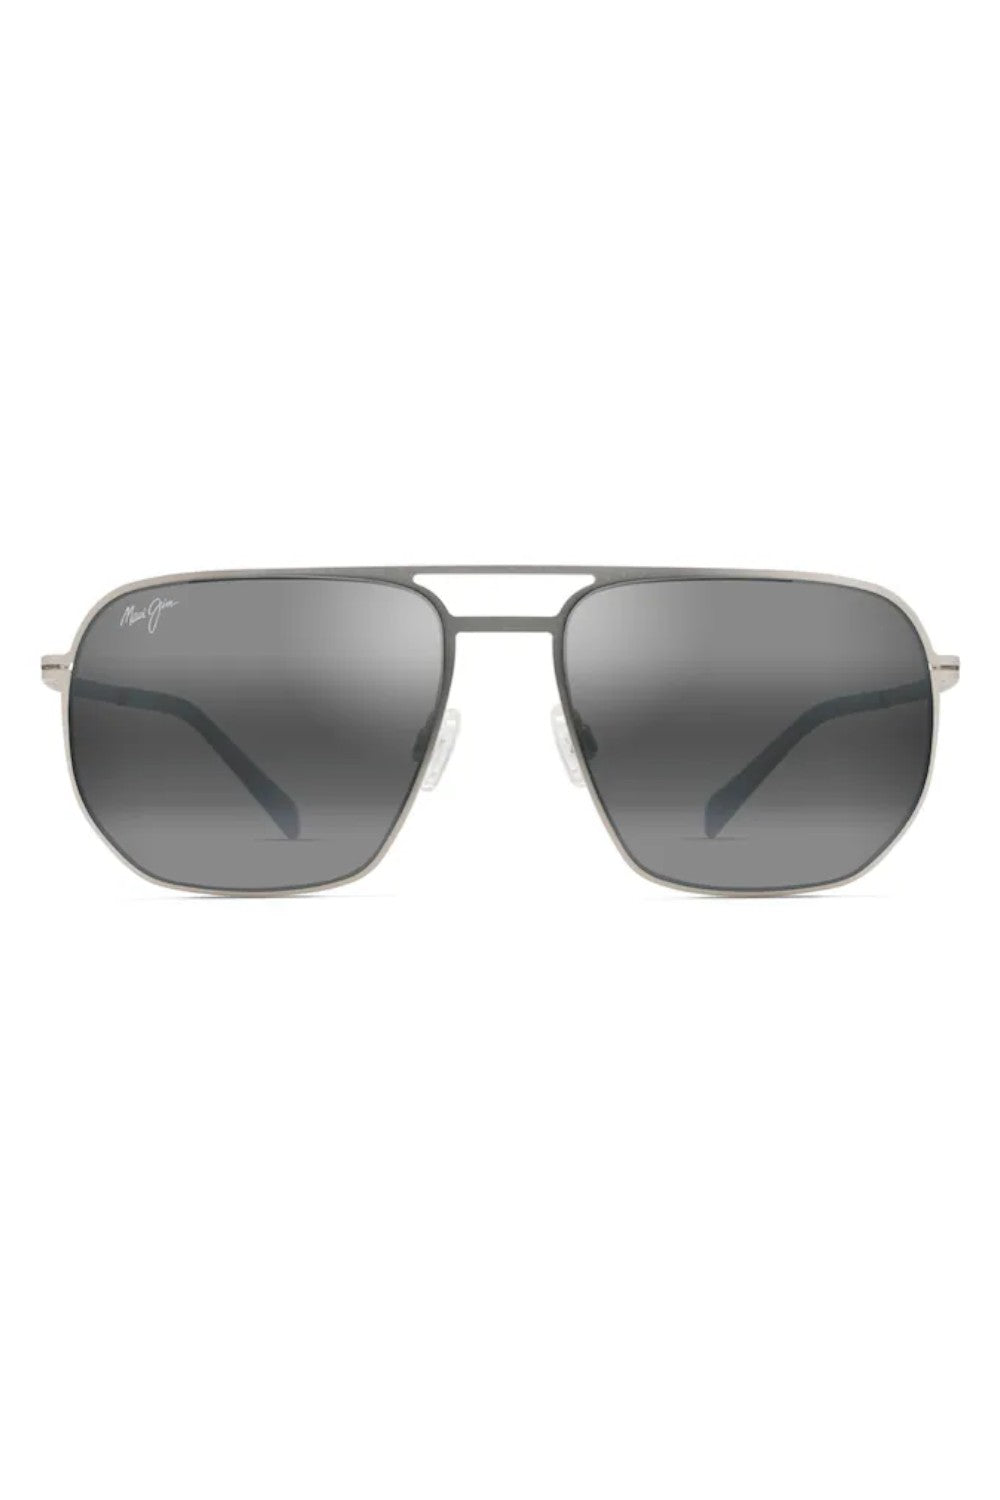 Shark’s Cove, inspired by the marvels awaiting to be discovered, features PolarizedPlus2® lenses to reveal the beauty that lies beneath. Crafted with precision, this thin stainless steel frame boasts a sophisticated appeal with a delicately carved framework encasing the lenses. At the intersection of style and functionality, Shark’s Cove pairs a sleek and lightweight aviator silhouette with MauiBrilliant™ lenses, making it the perfect companion for shoreline or citywide explorations.